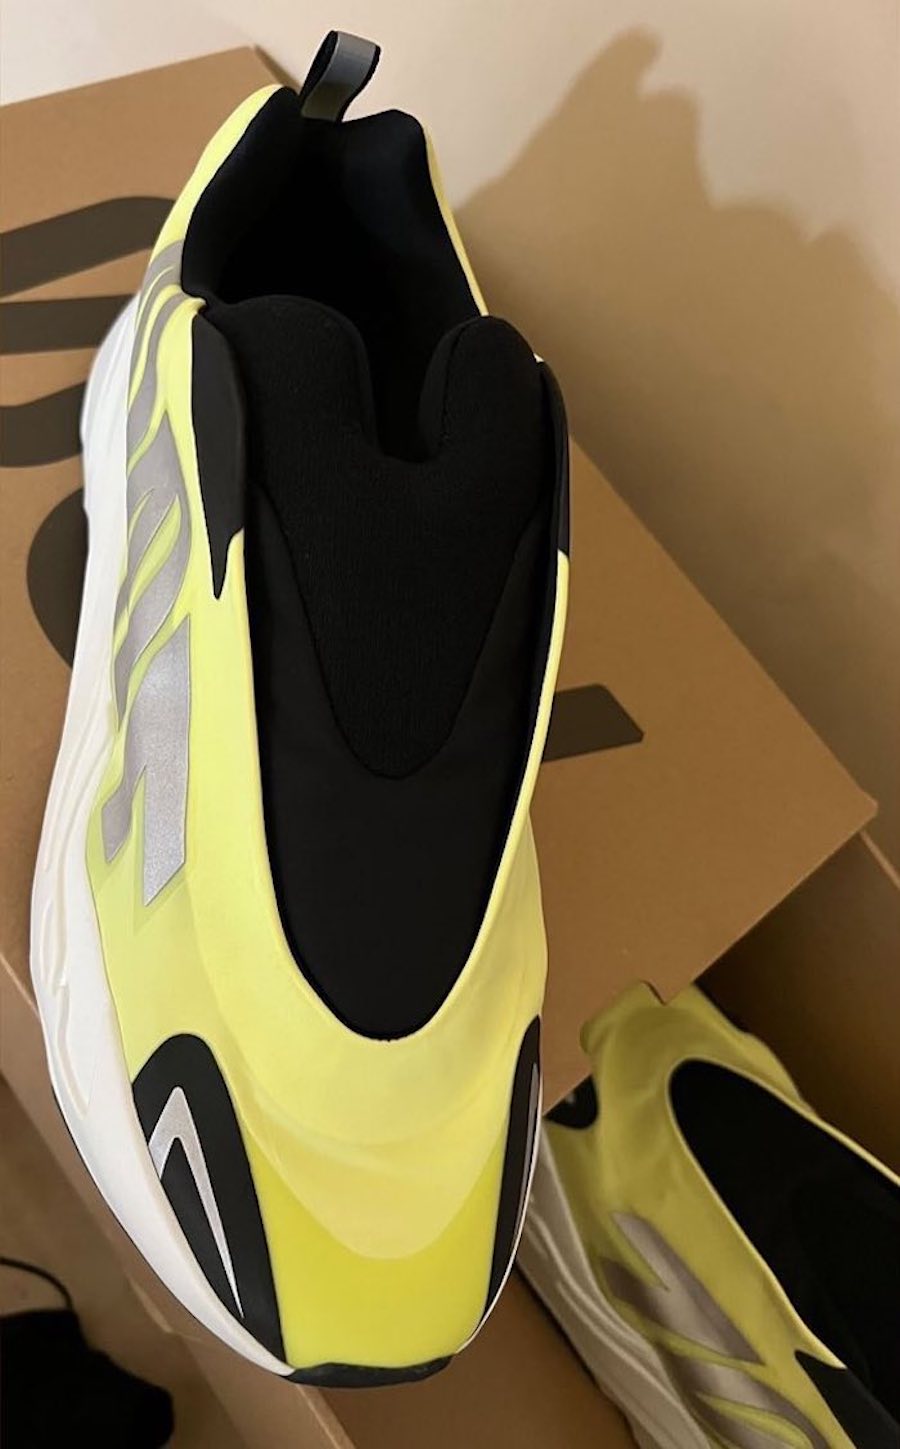 adidas Yeezy Boost 700 MNVN Laceless Phosphor GY2055 Release Date